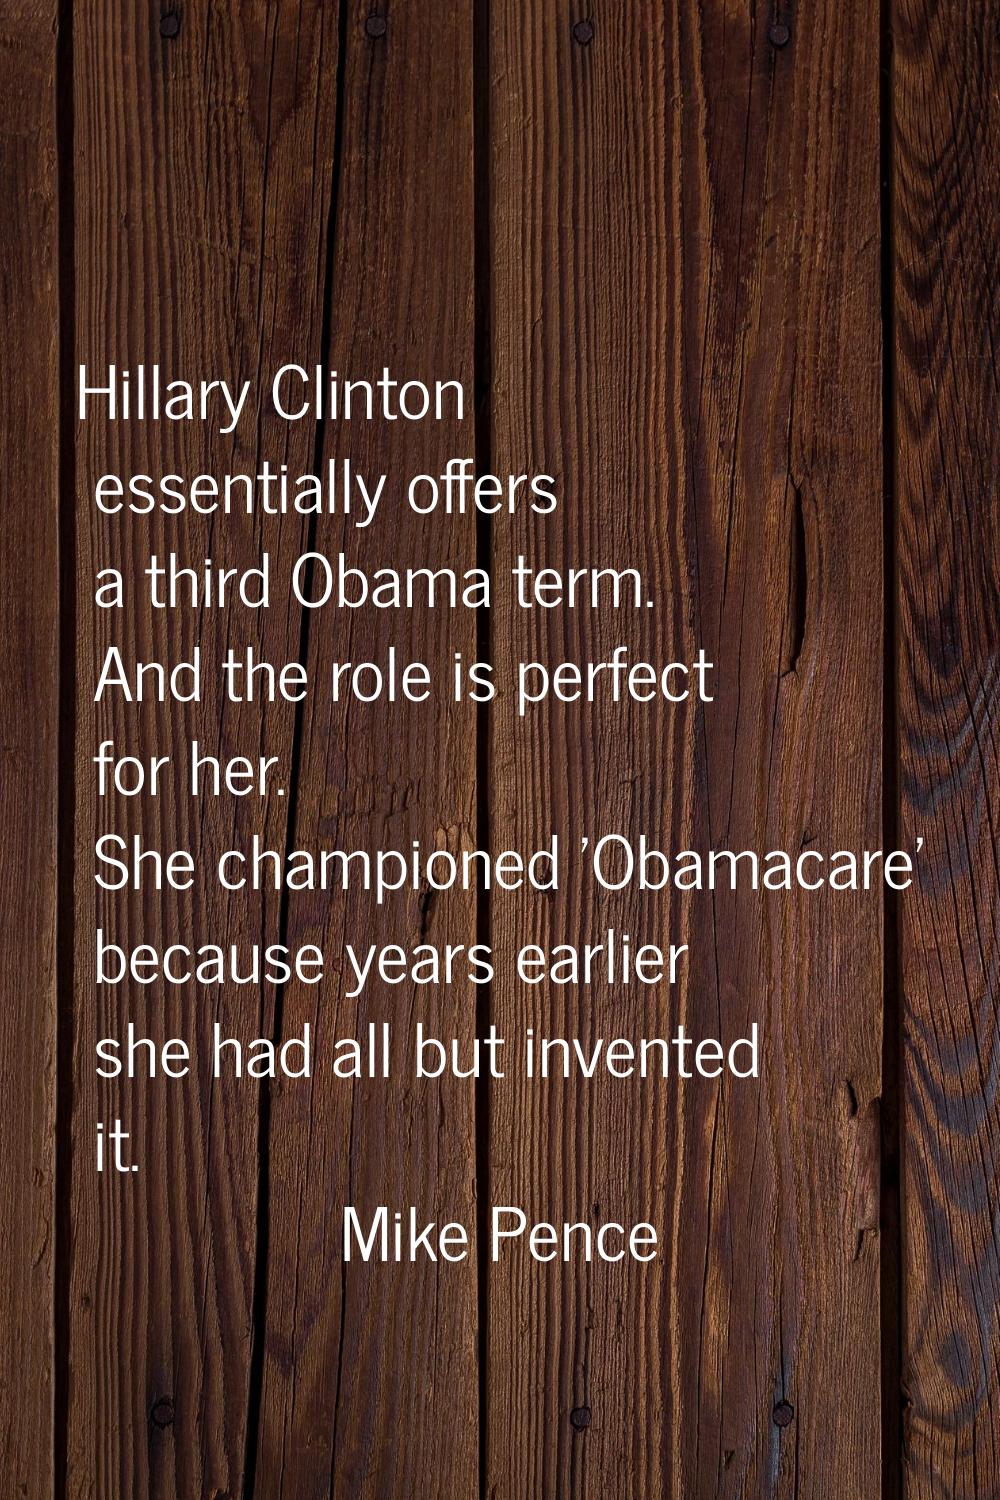 Hillary Clinton essentially offers a third Obama term. And the role is perfect for her. She champio